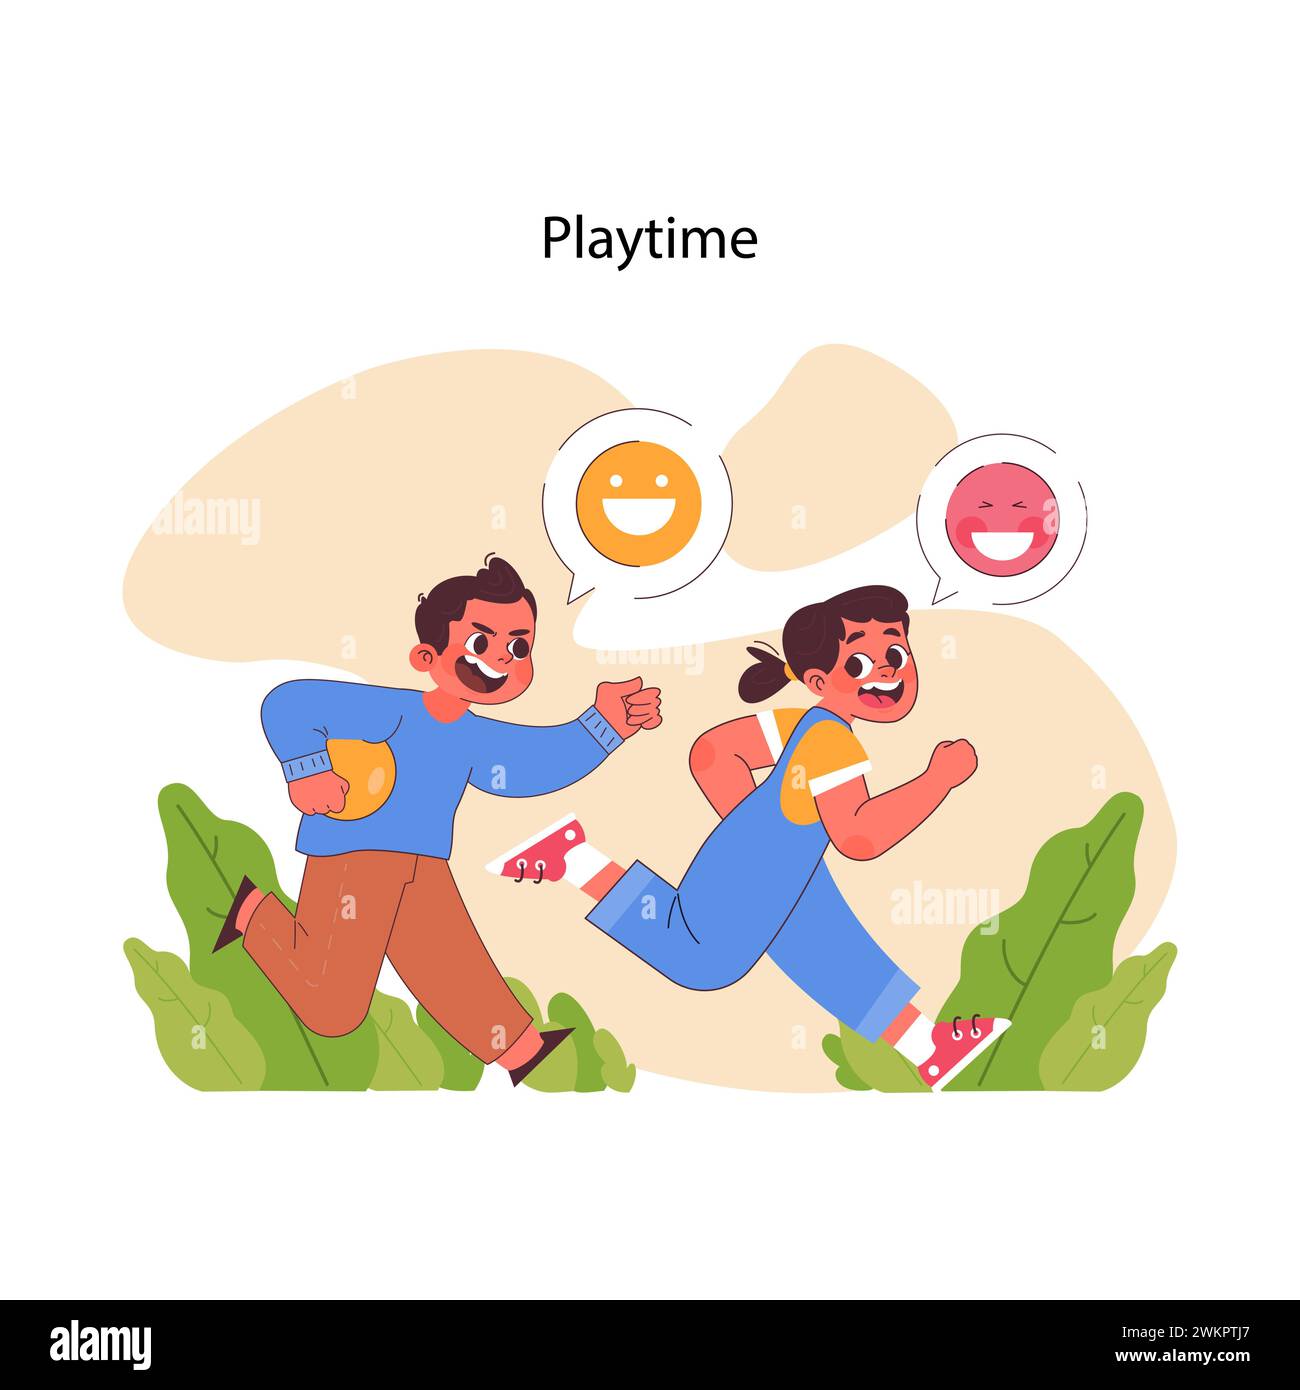 Playtime concept. Energetic kids racing outdoors, expressing happiness with smiley faces, embracing childhood moments. Playing together with friends, having fun. Flat vector illustration Stock Vector